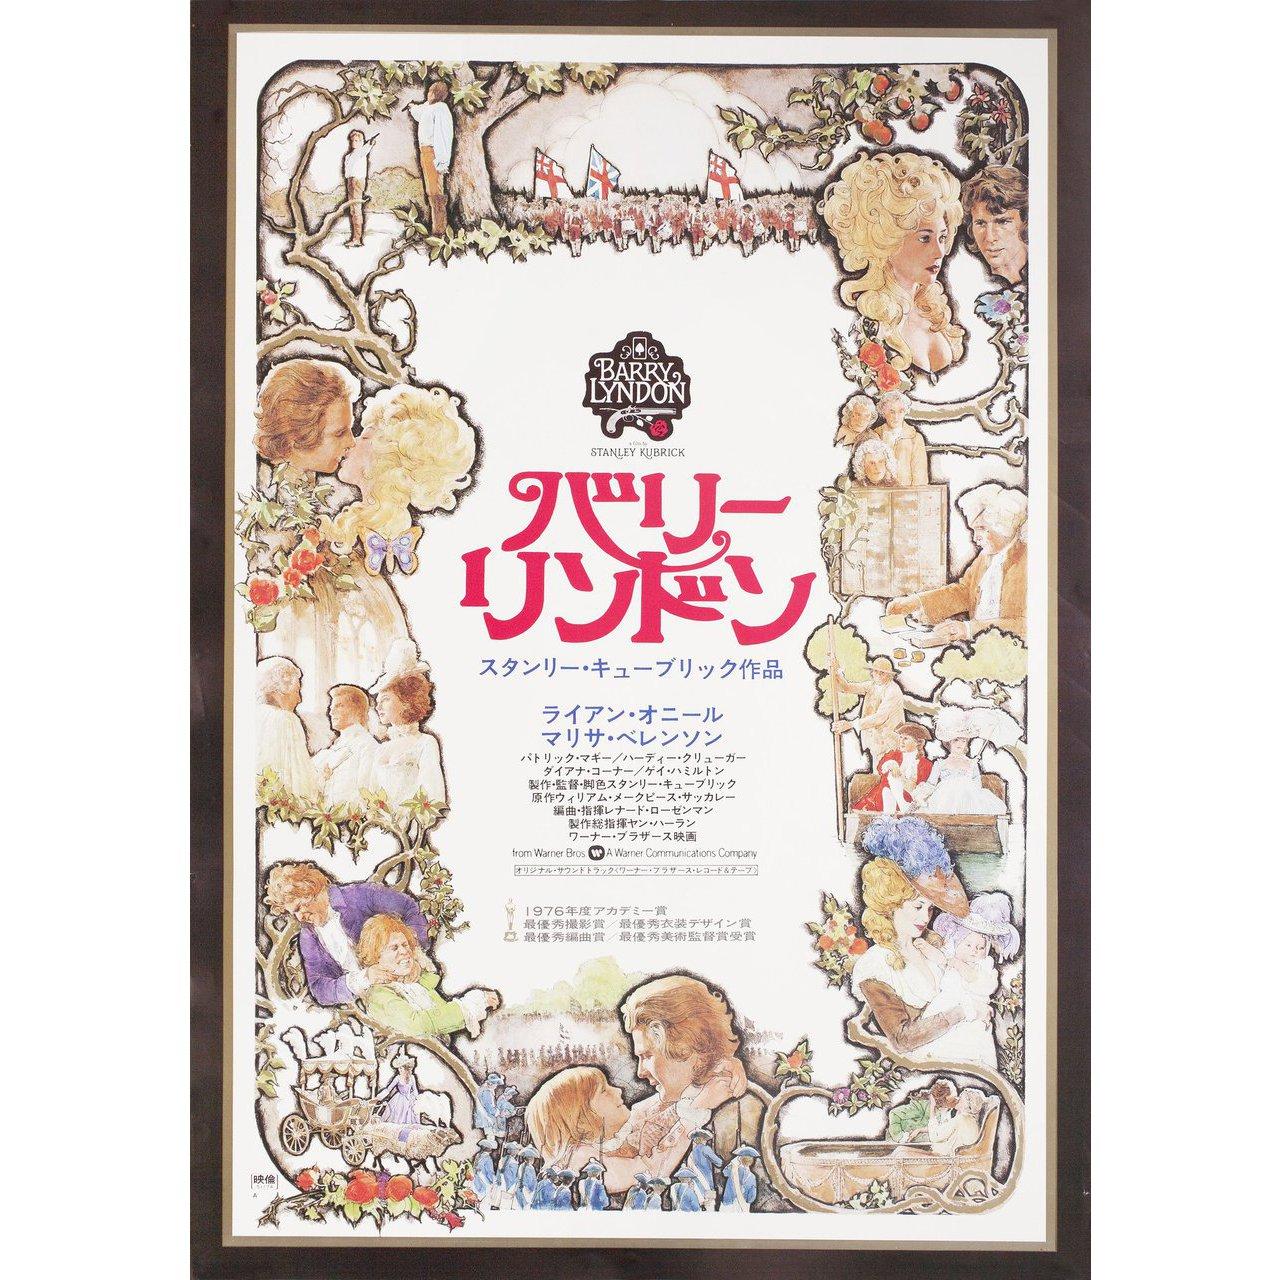 Original 1976 Japanese B2 poster for the film Barry Lyndon directed by Stanley Kubrick with Ryan O'Neal / Marisa Berenson / Patrick Magee / Hardy Kruger. Very Good-Fine condition, rolled. Please note: the size is stated in inches and the actual size